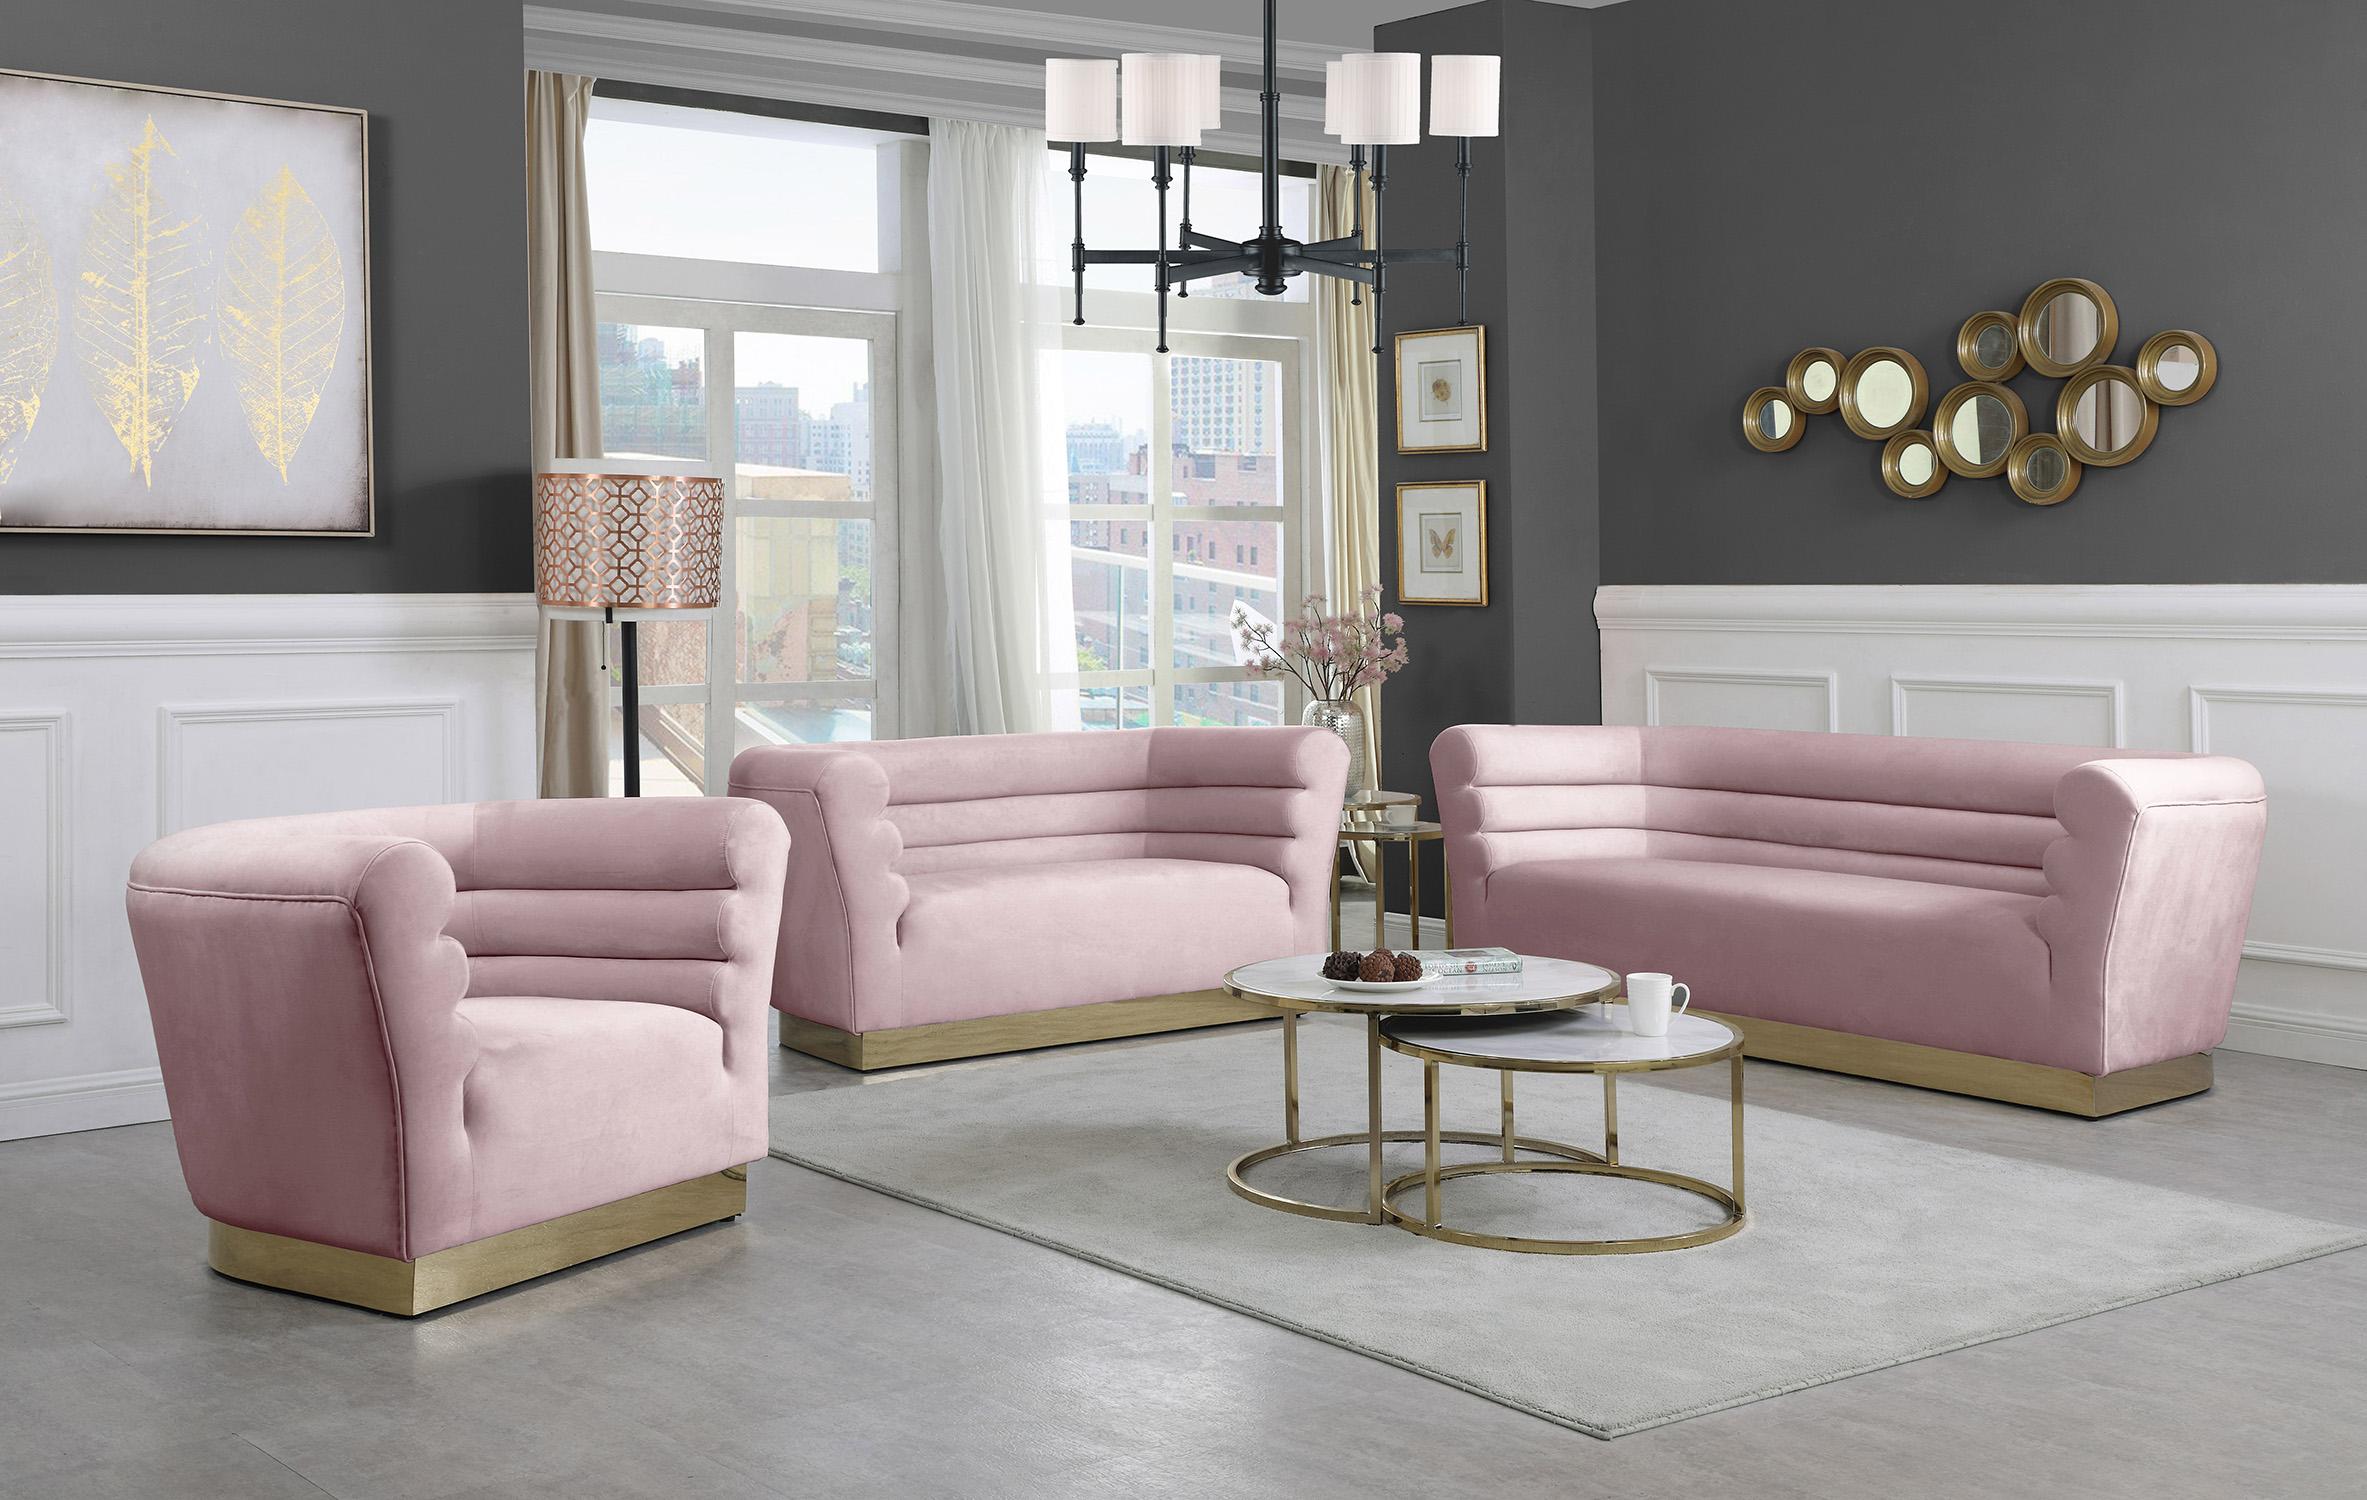 

    
669Pink-C-Set-2 Pink Velvet Channel Tufting Chair Set 2P BELLINI 669Pink-C Meridian Contemporary
